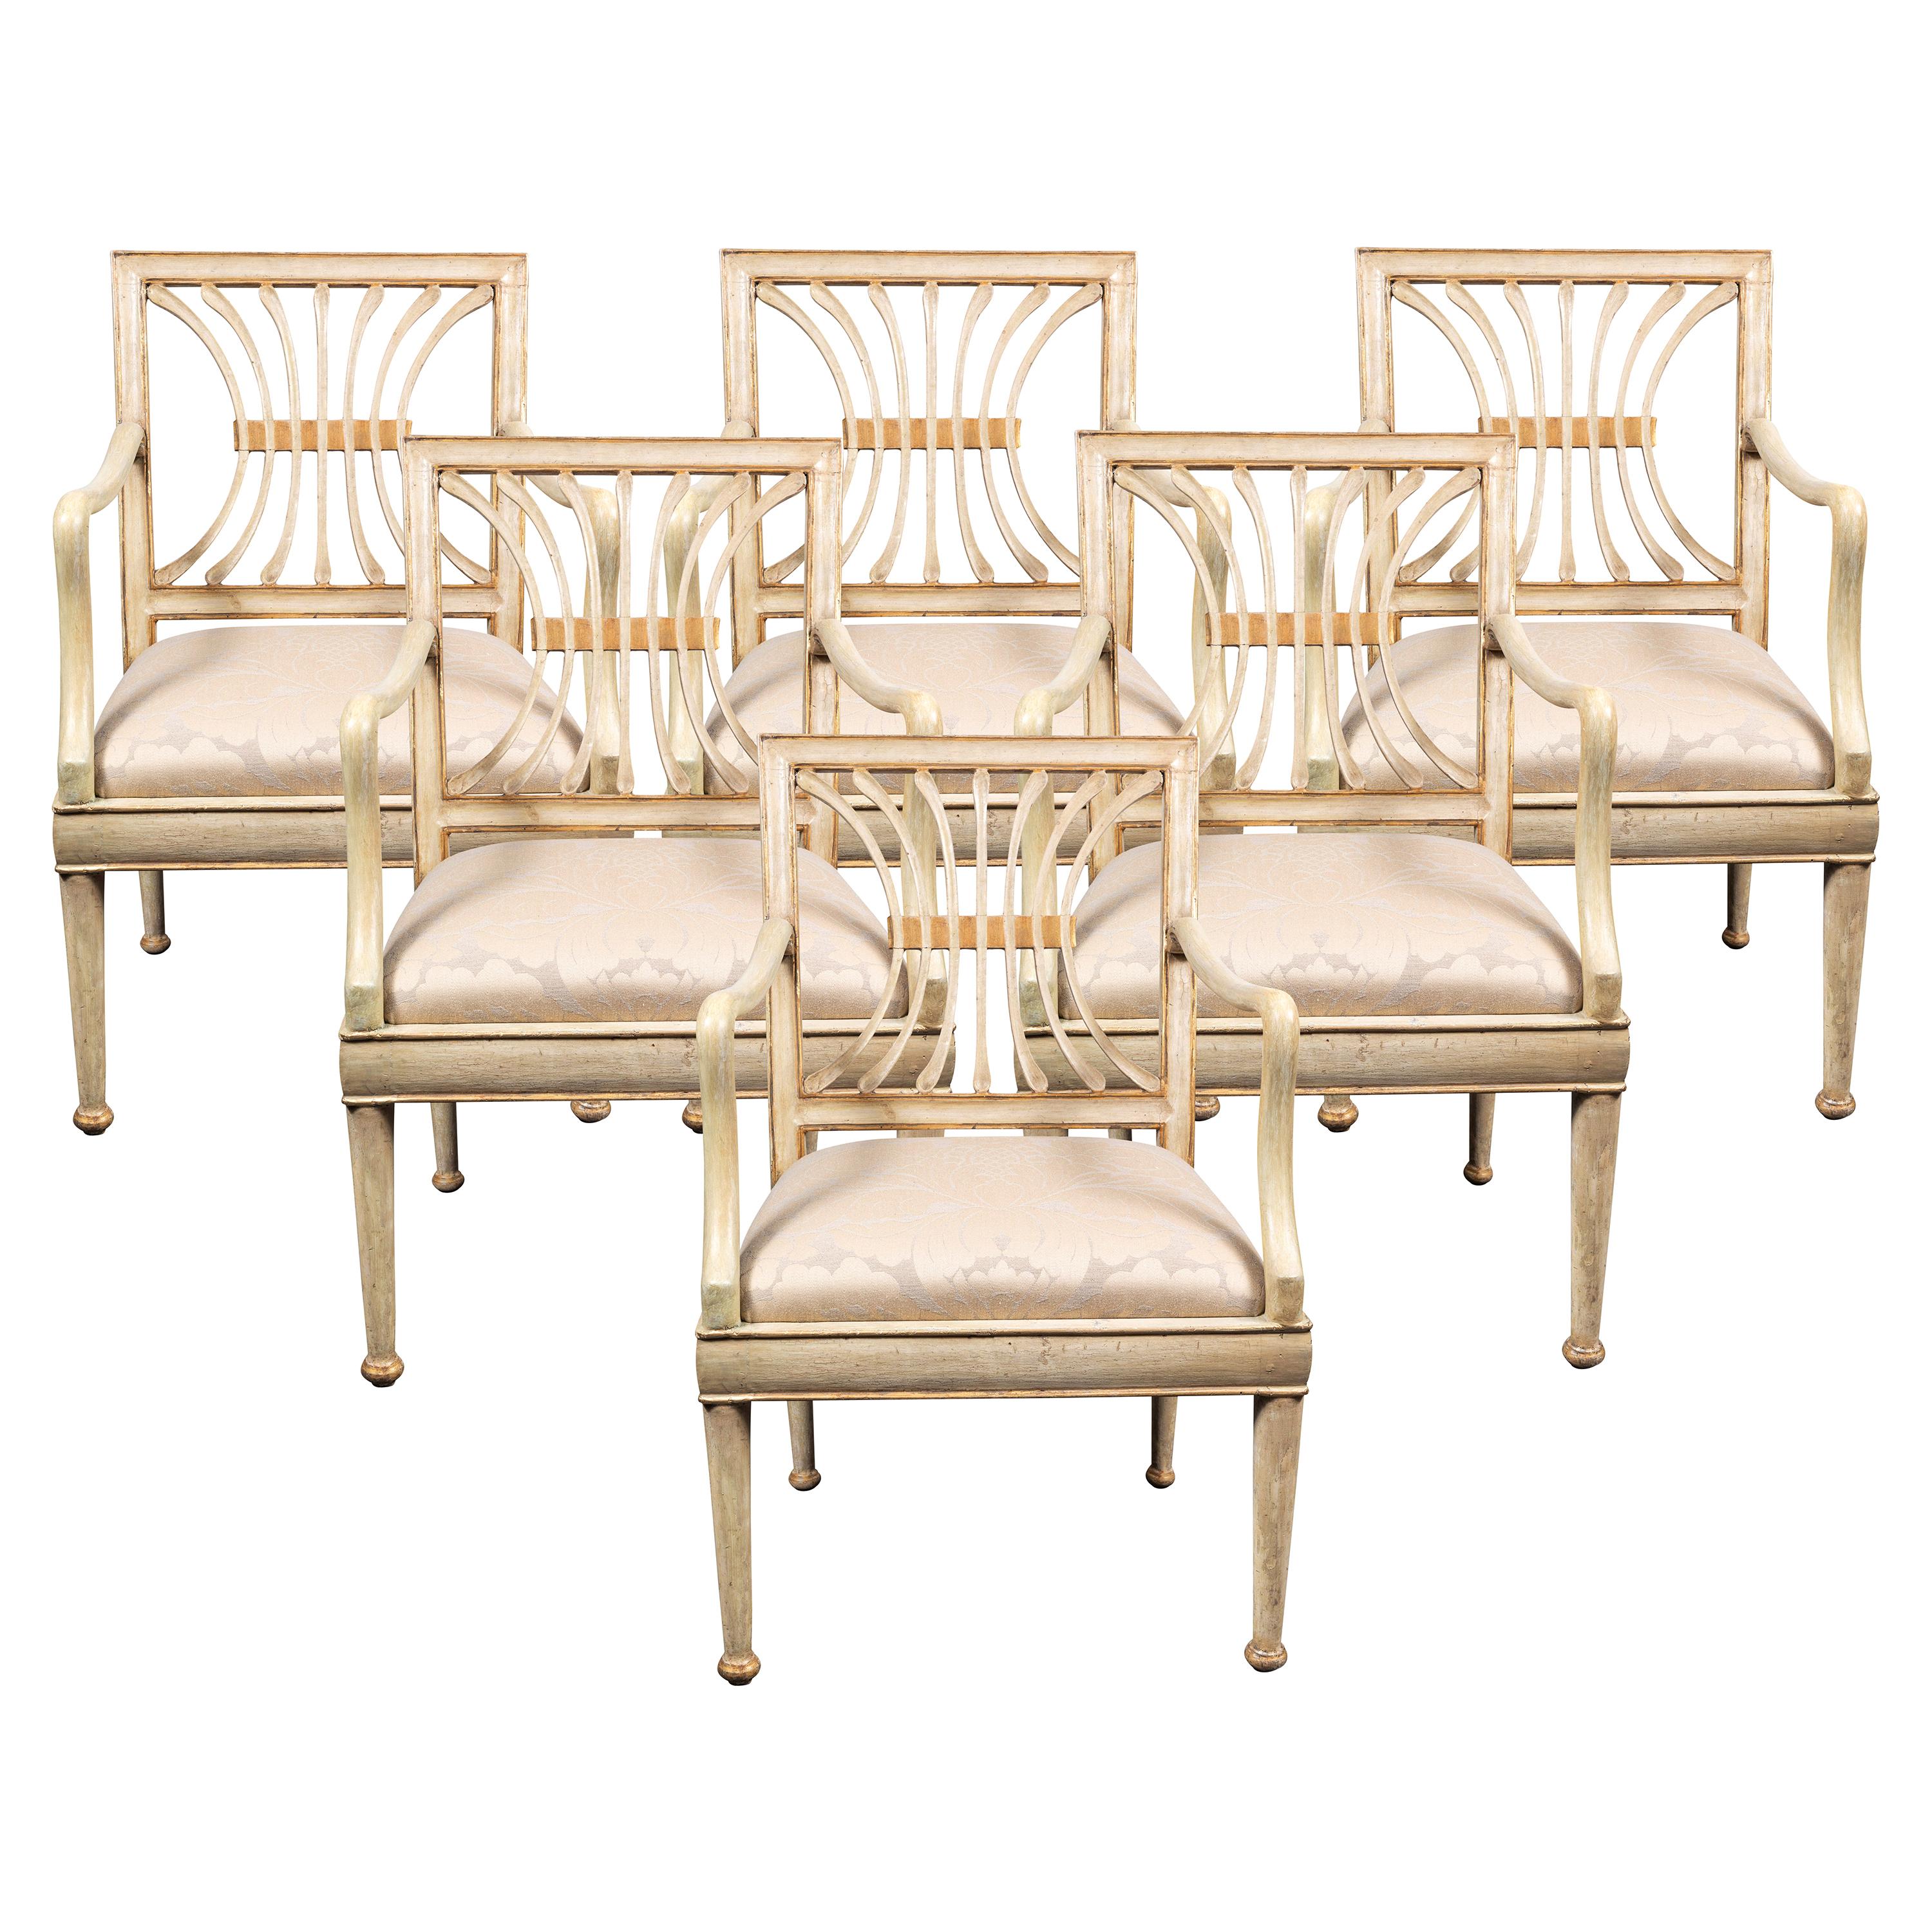 Suite of Antique Painted Chairs